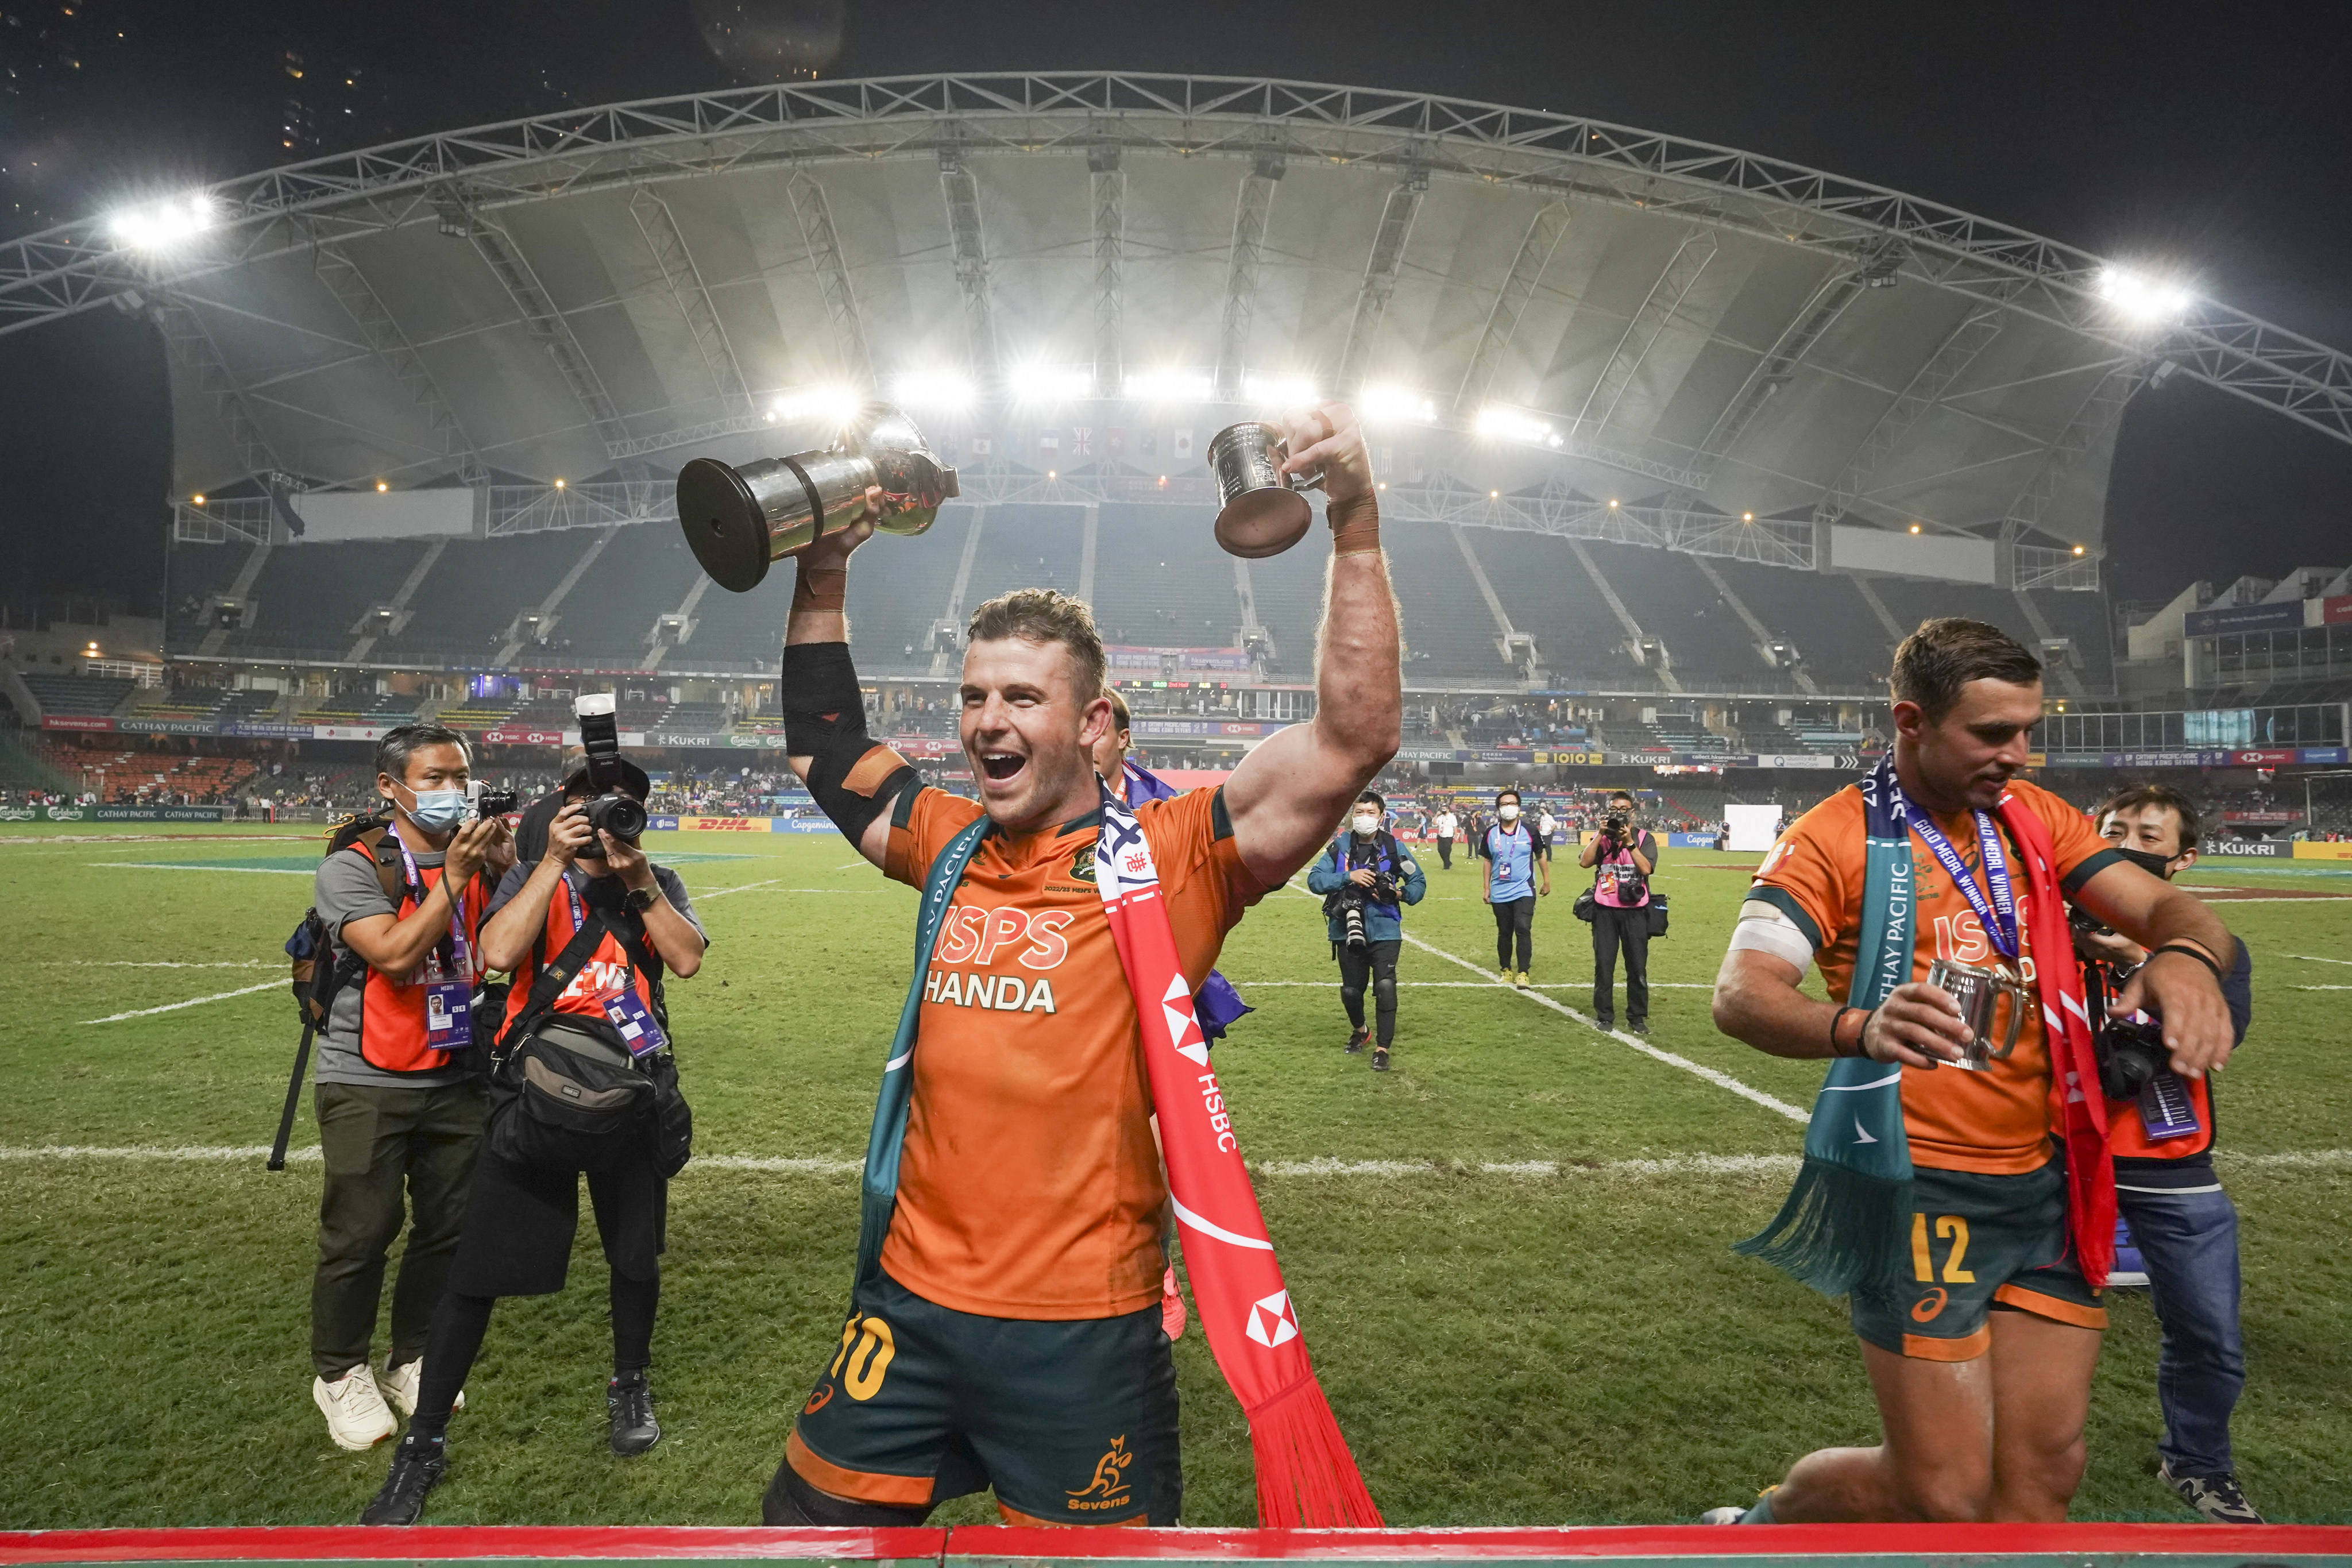 Hong Kong’s officials have said the return of the rugby Sevens is a big win for the city after years of pandemic restrictions. Photo: Sam Tsang